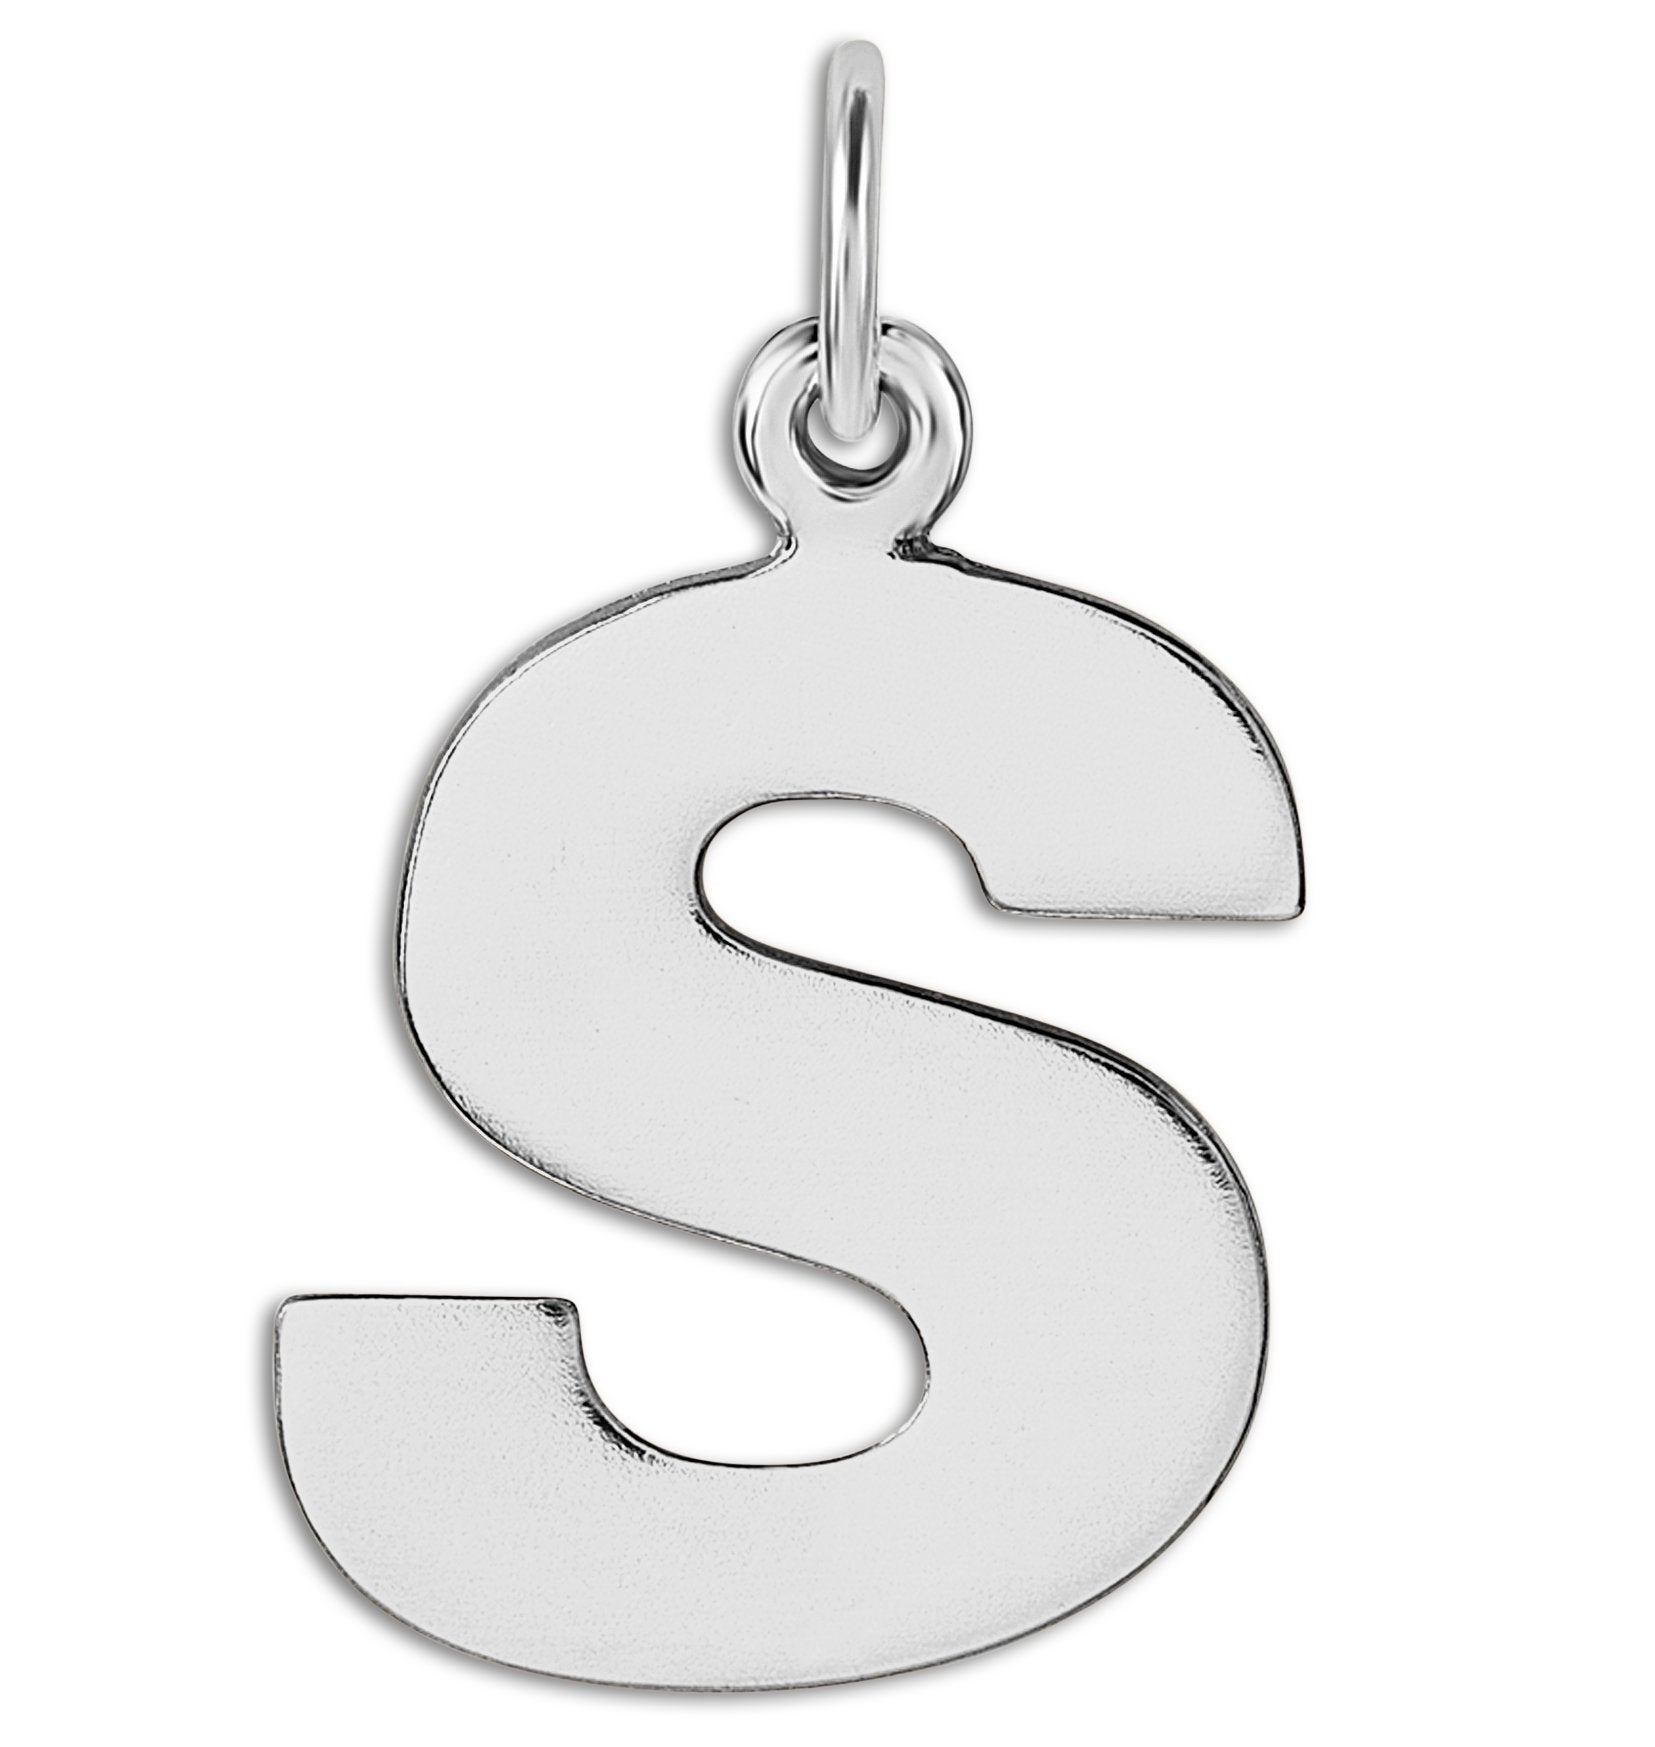 M Cutout Letter Charm for Necklaces and Bracelets in Gold or Silver 14K Yellow Gold by Helen Ficalora